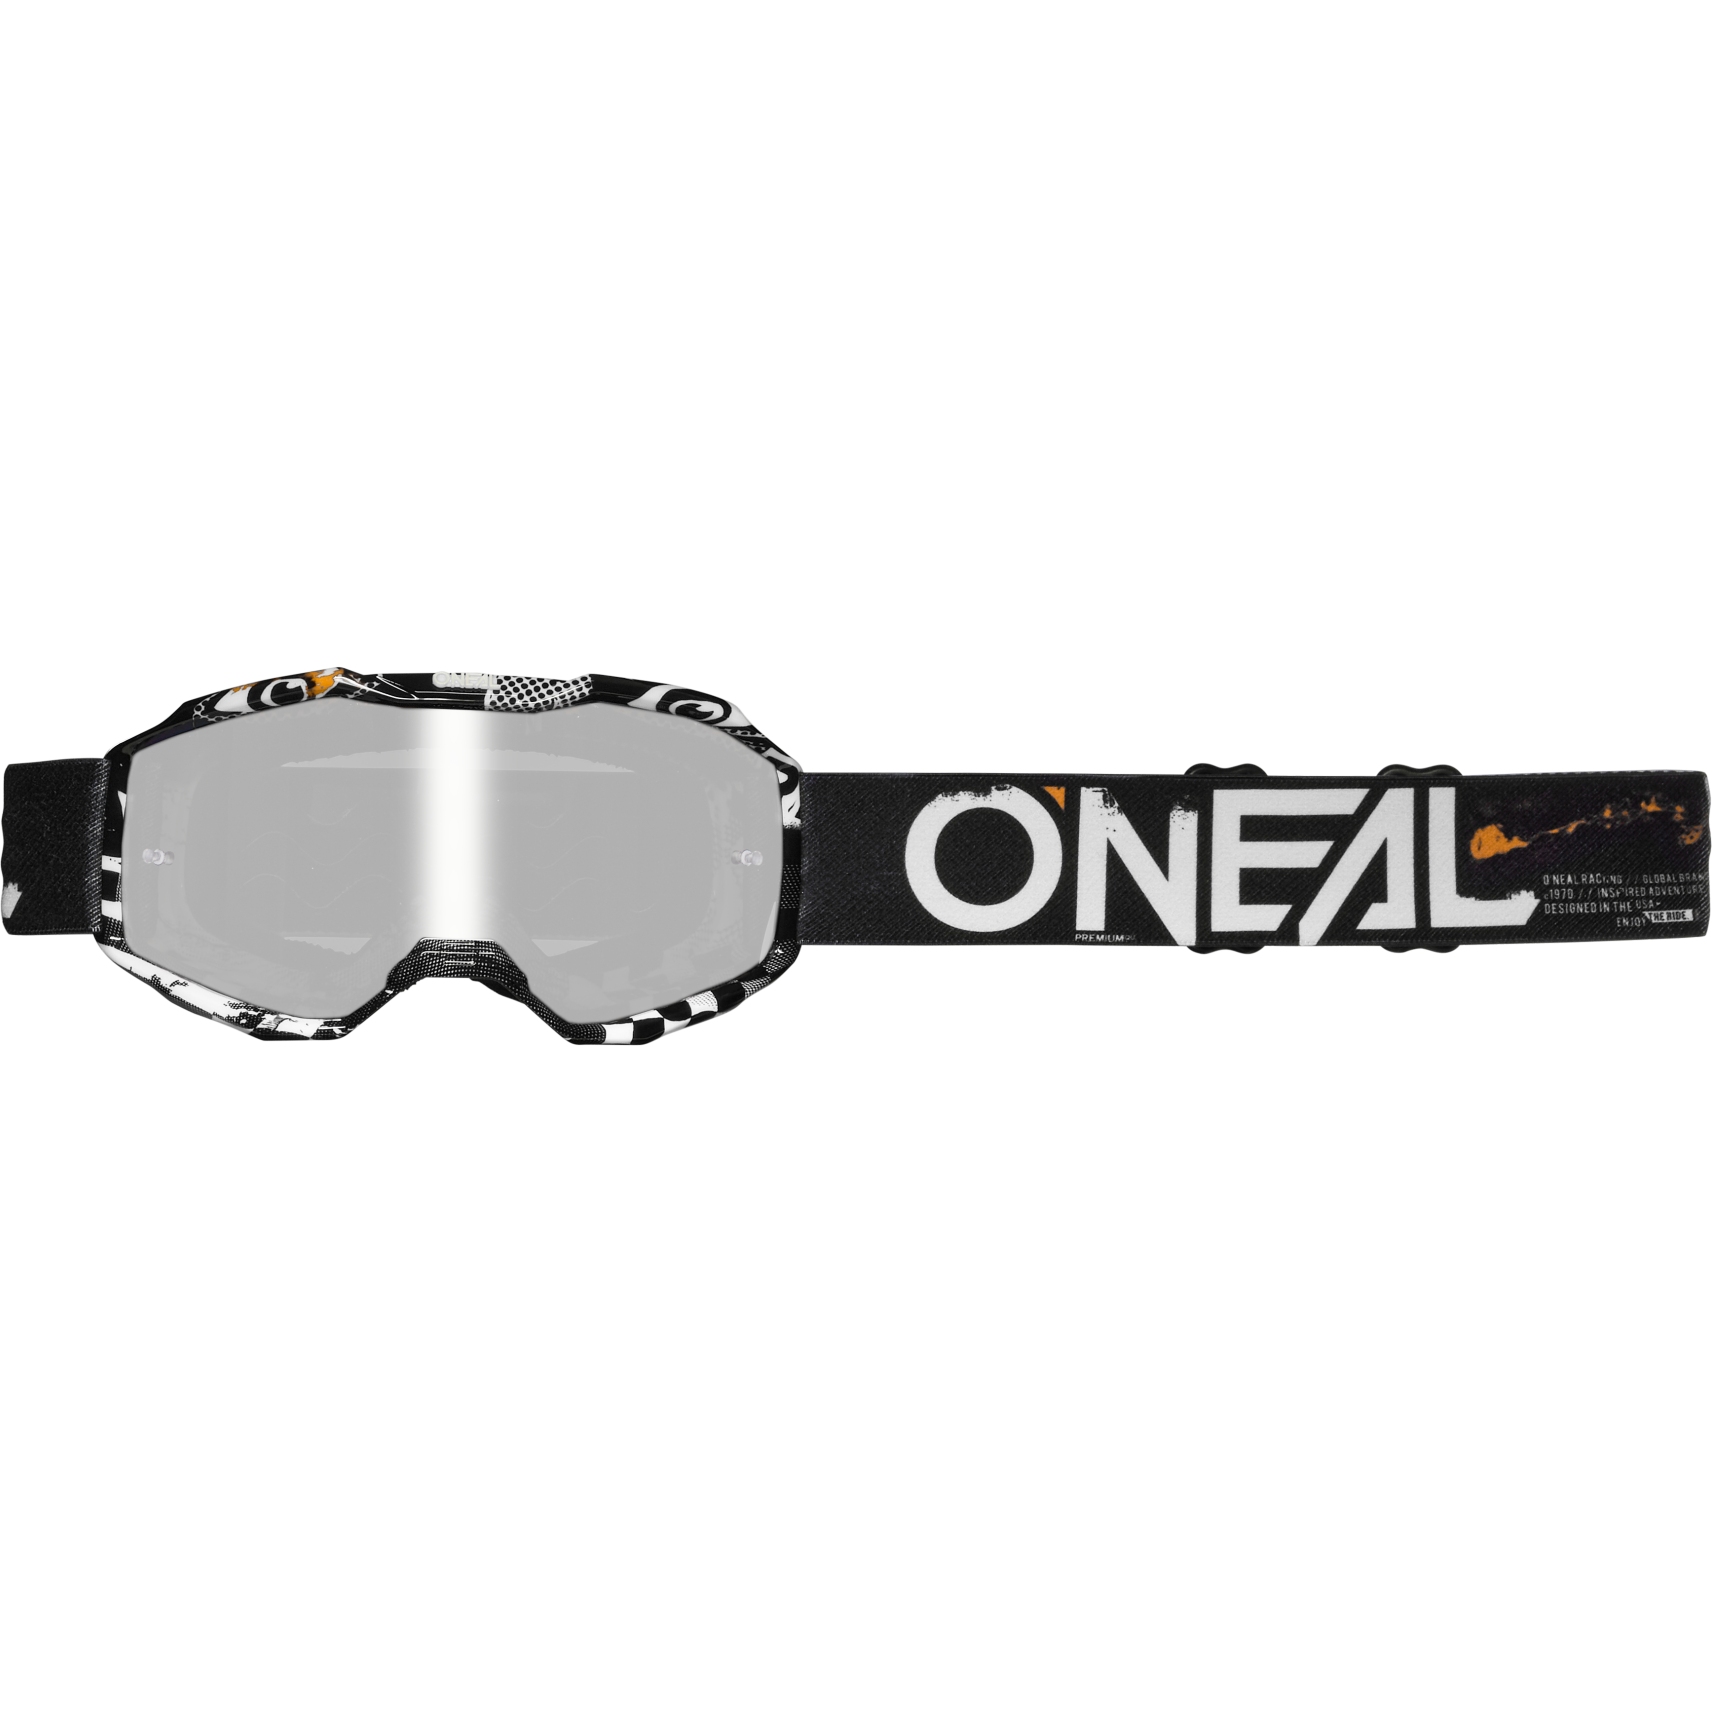 Image of O'Neal B-10 Youth Goggle - ATTACK V.24 black/white - silver mirror